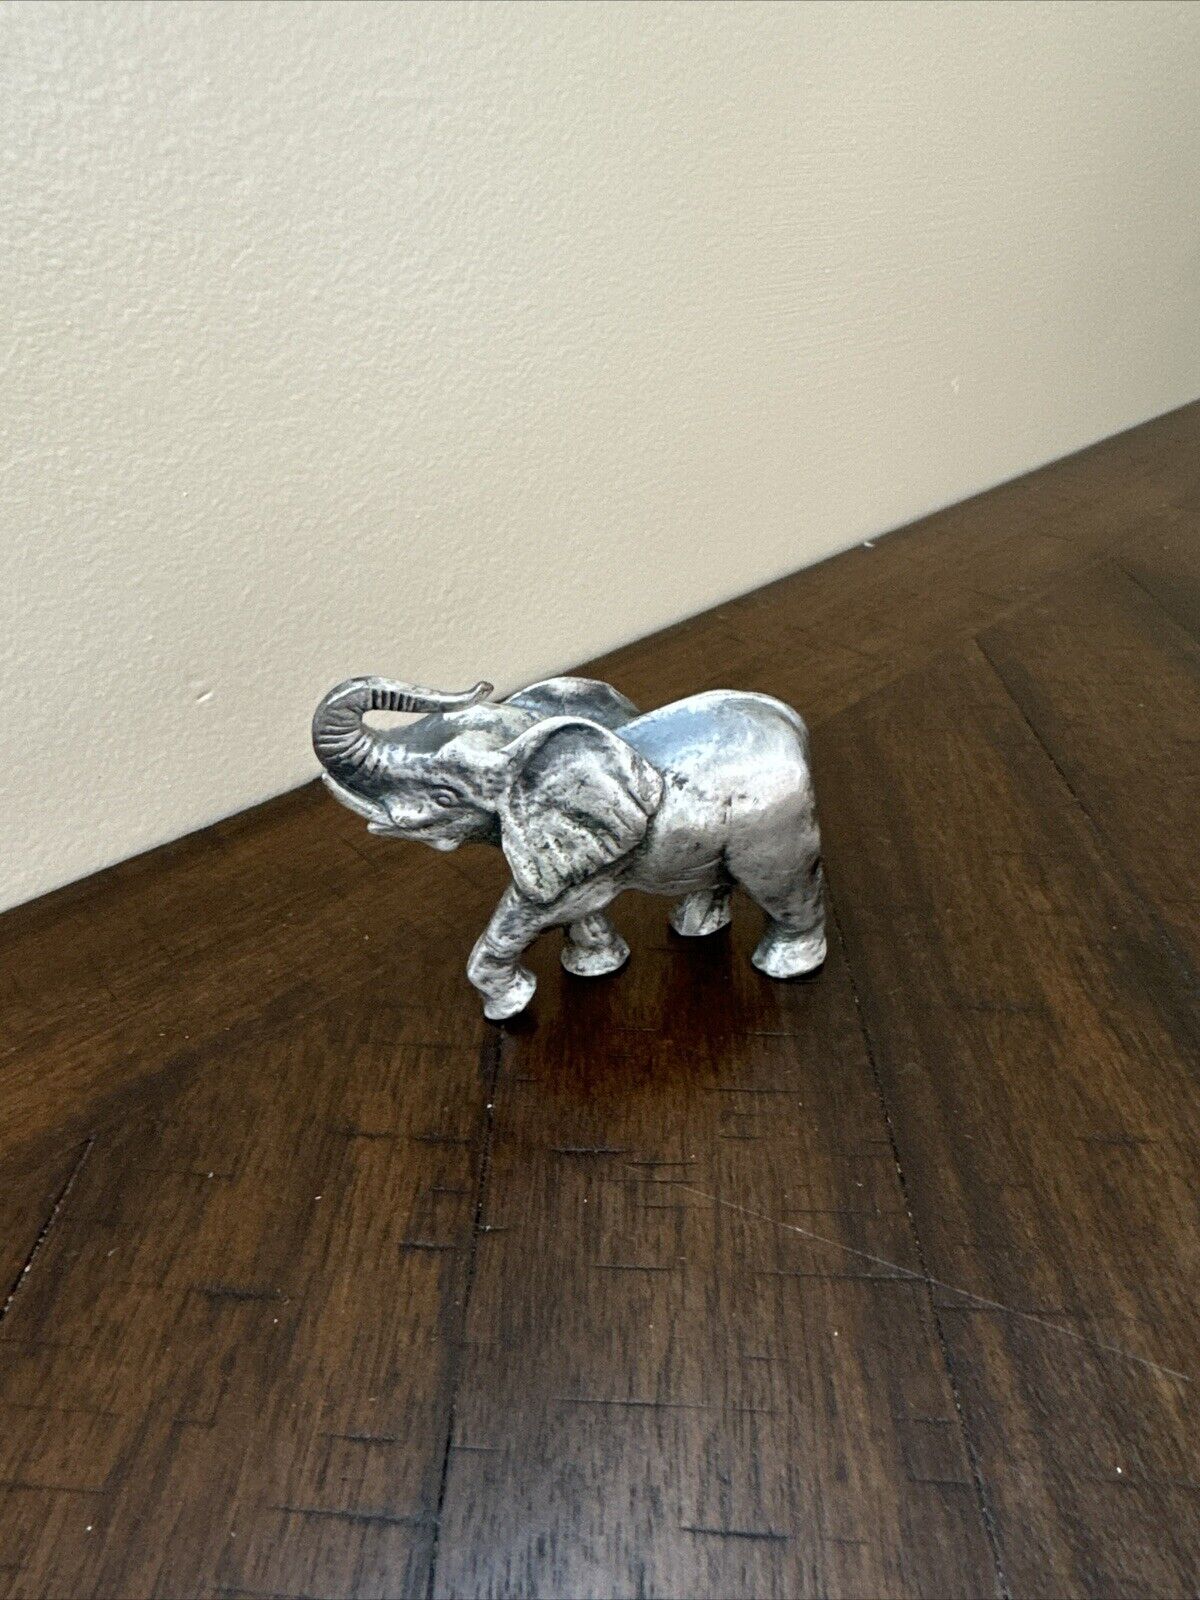 1992 VINTAGE PG PEWTER ELEPHANT PAPERWEIGHT HANDCRAFTED HEAVYY